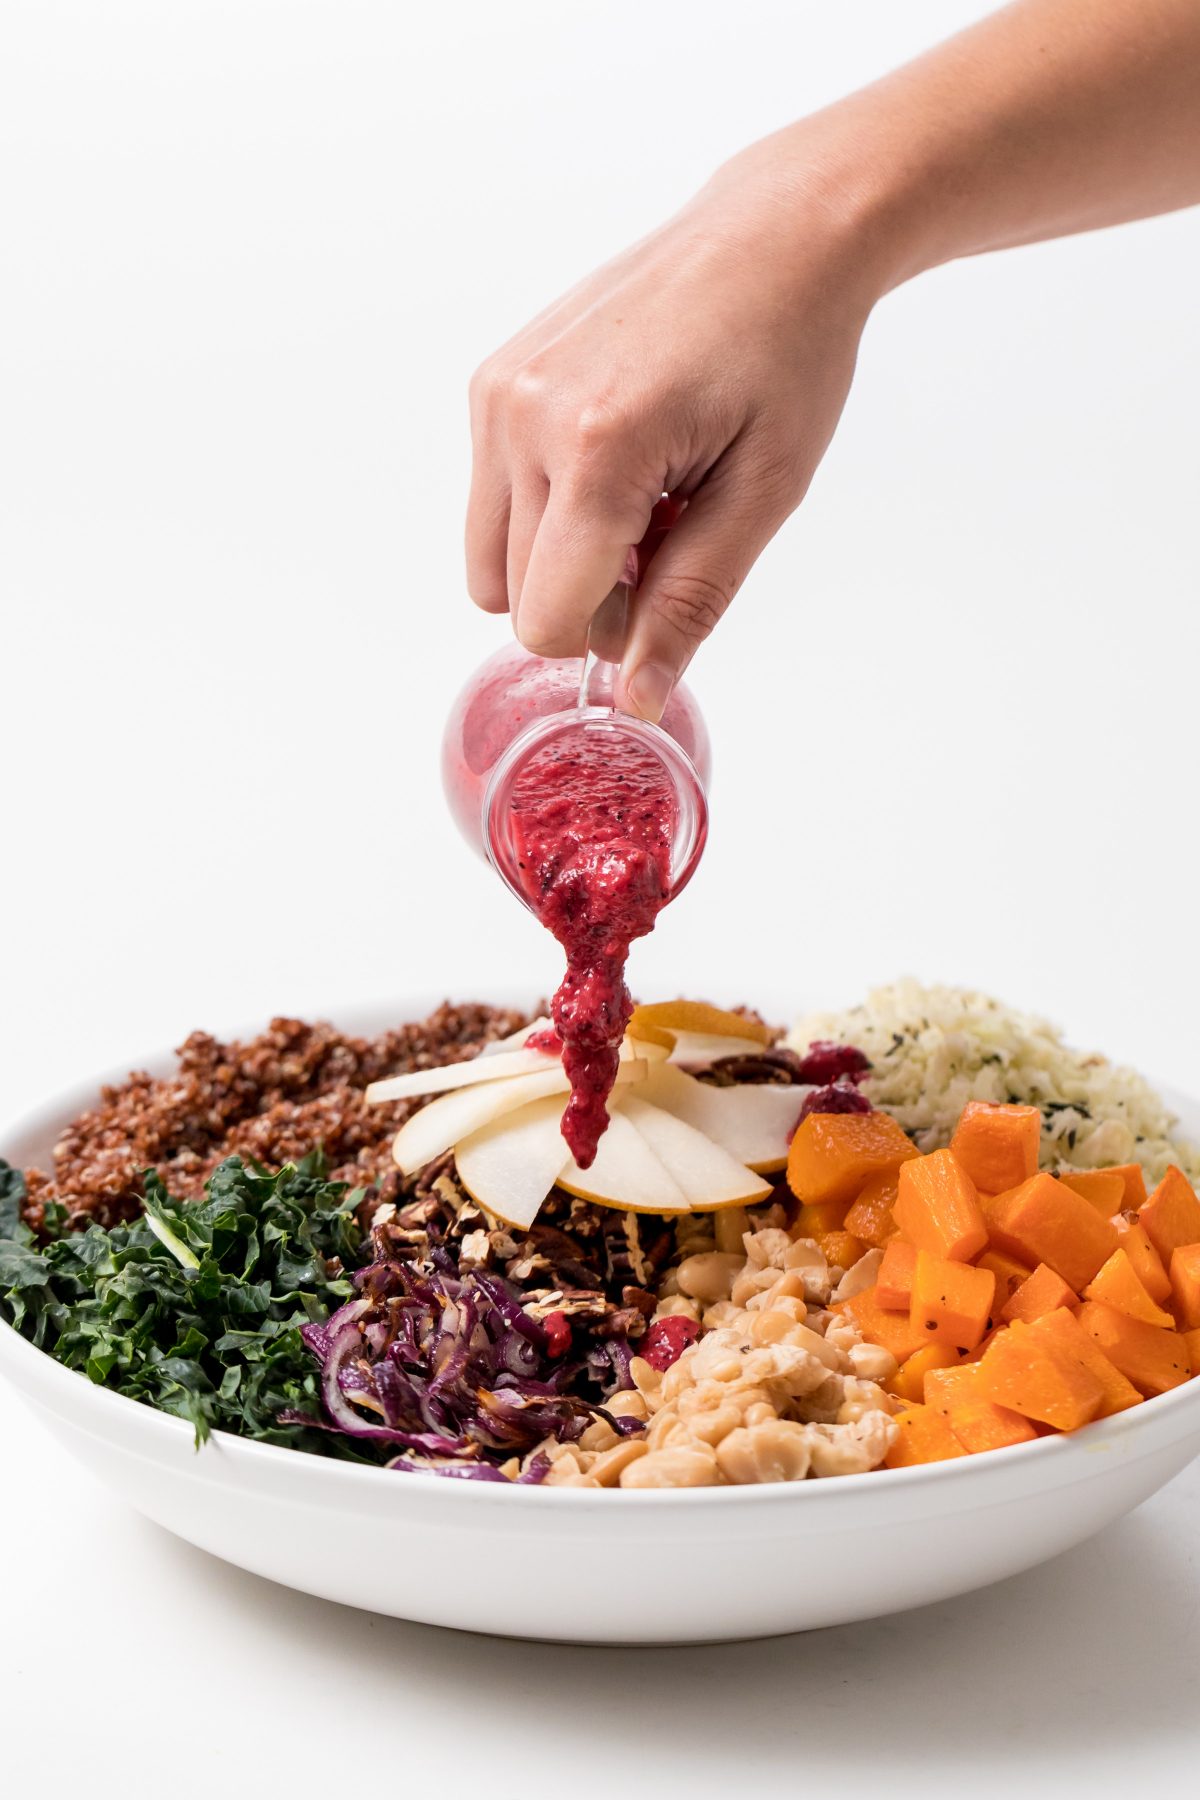 5D4B4194 - Winter Cauliflower Rice Bowls - Drizzle with cranberry sauce and serve